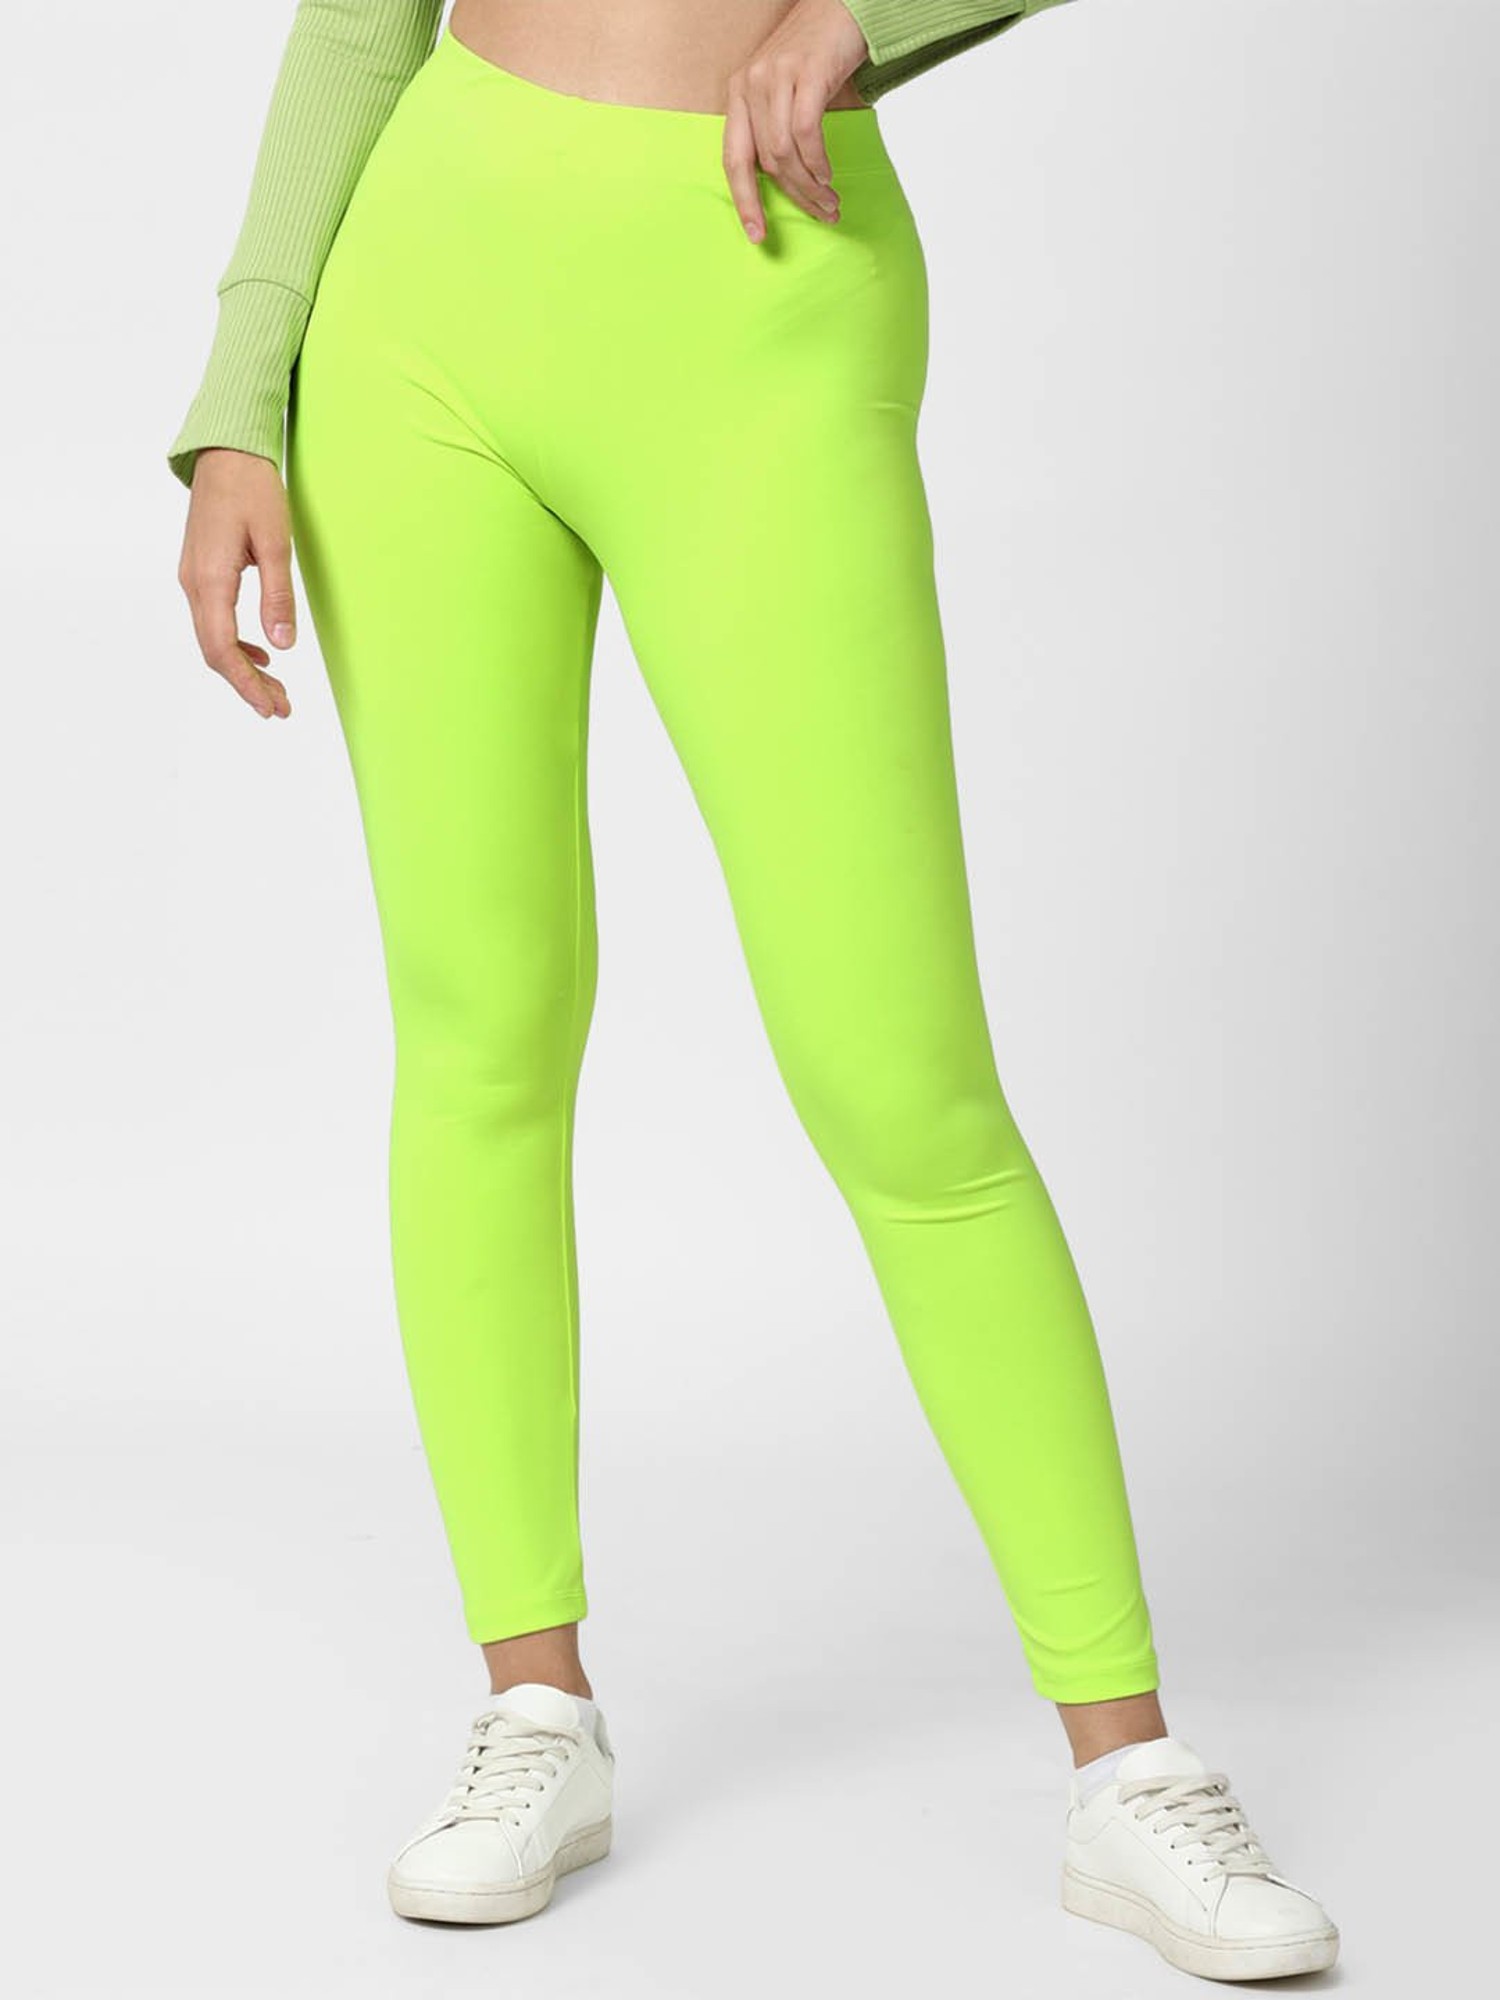 Colorful Soft Neon Leggings Stretchy Fluro Shiny Pants for Gym Yoga Dance  Party | eBay